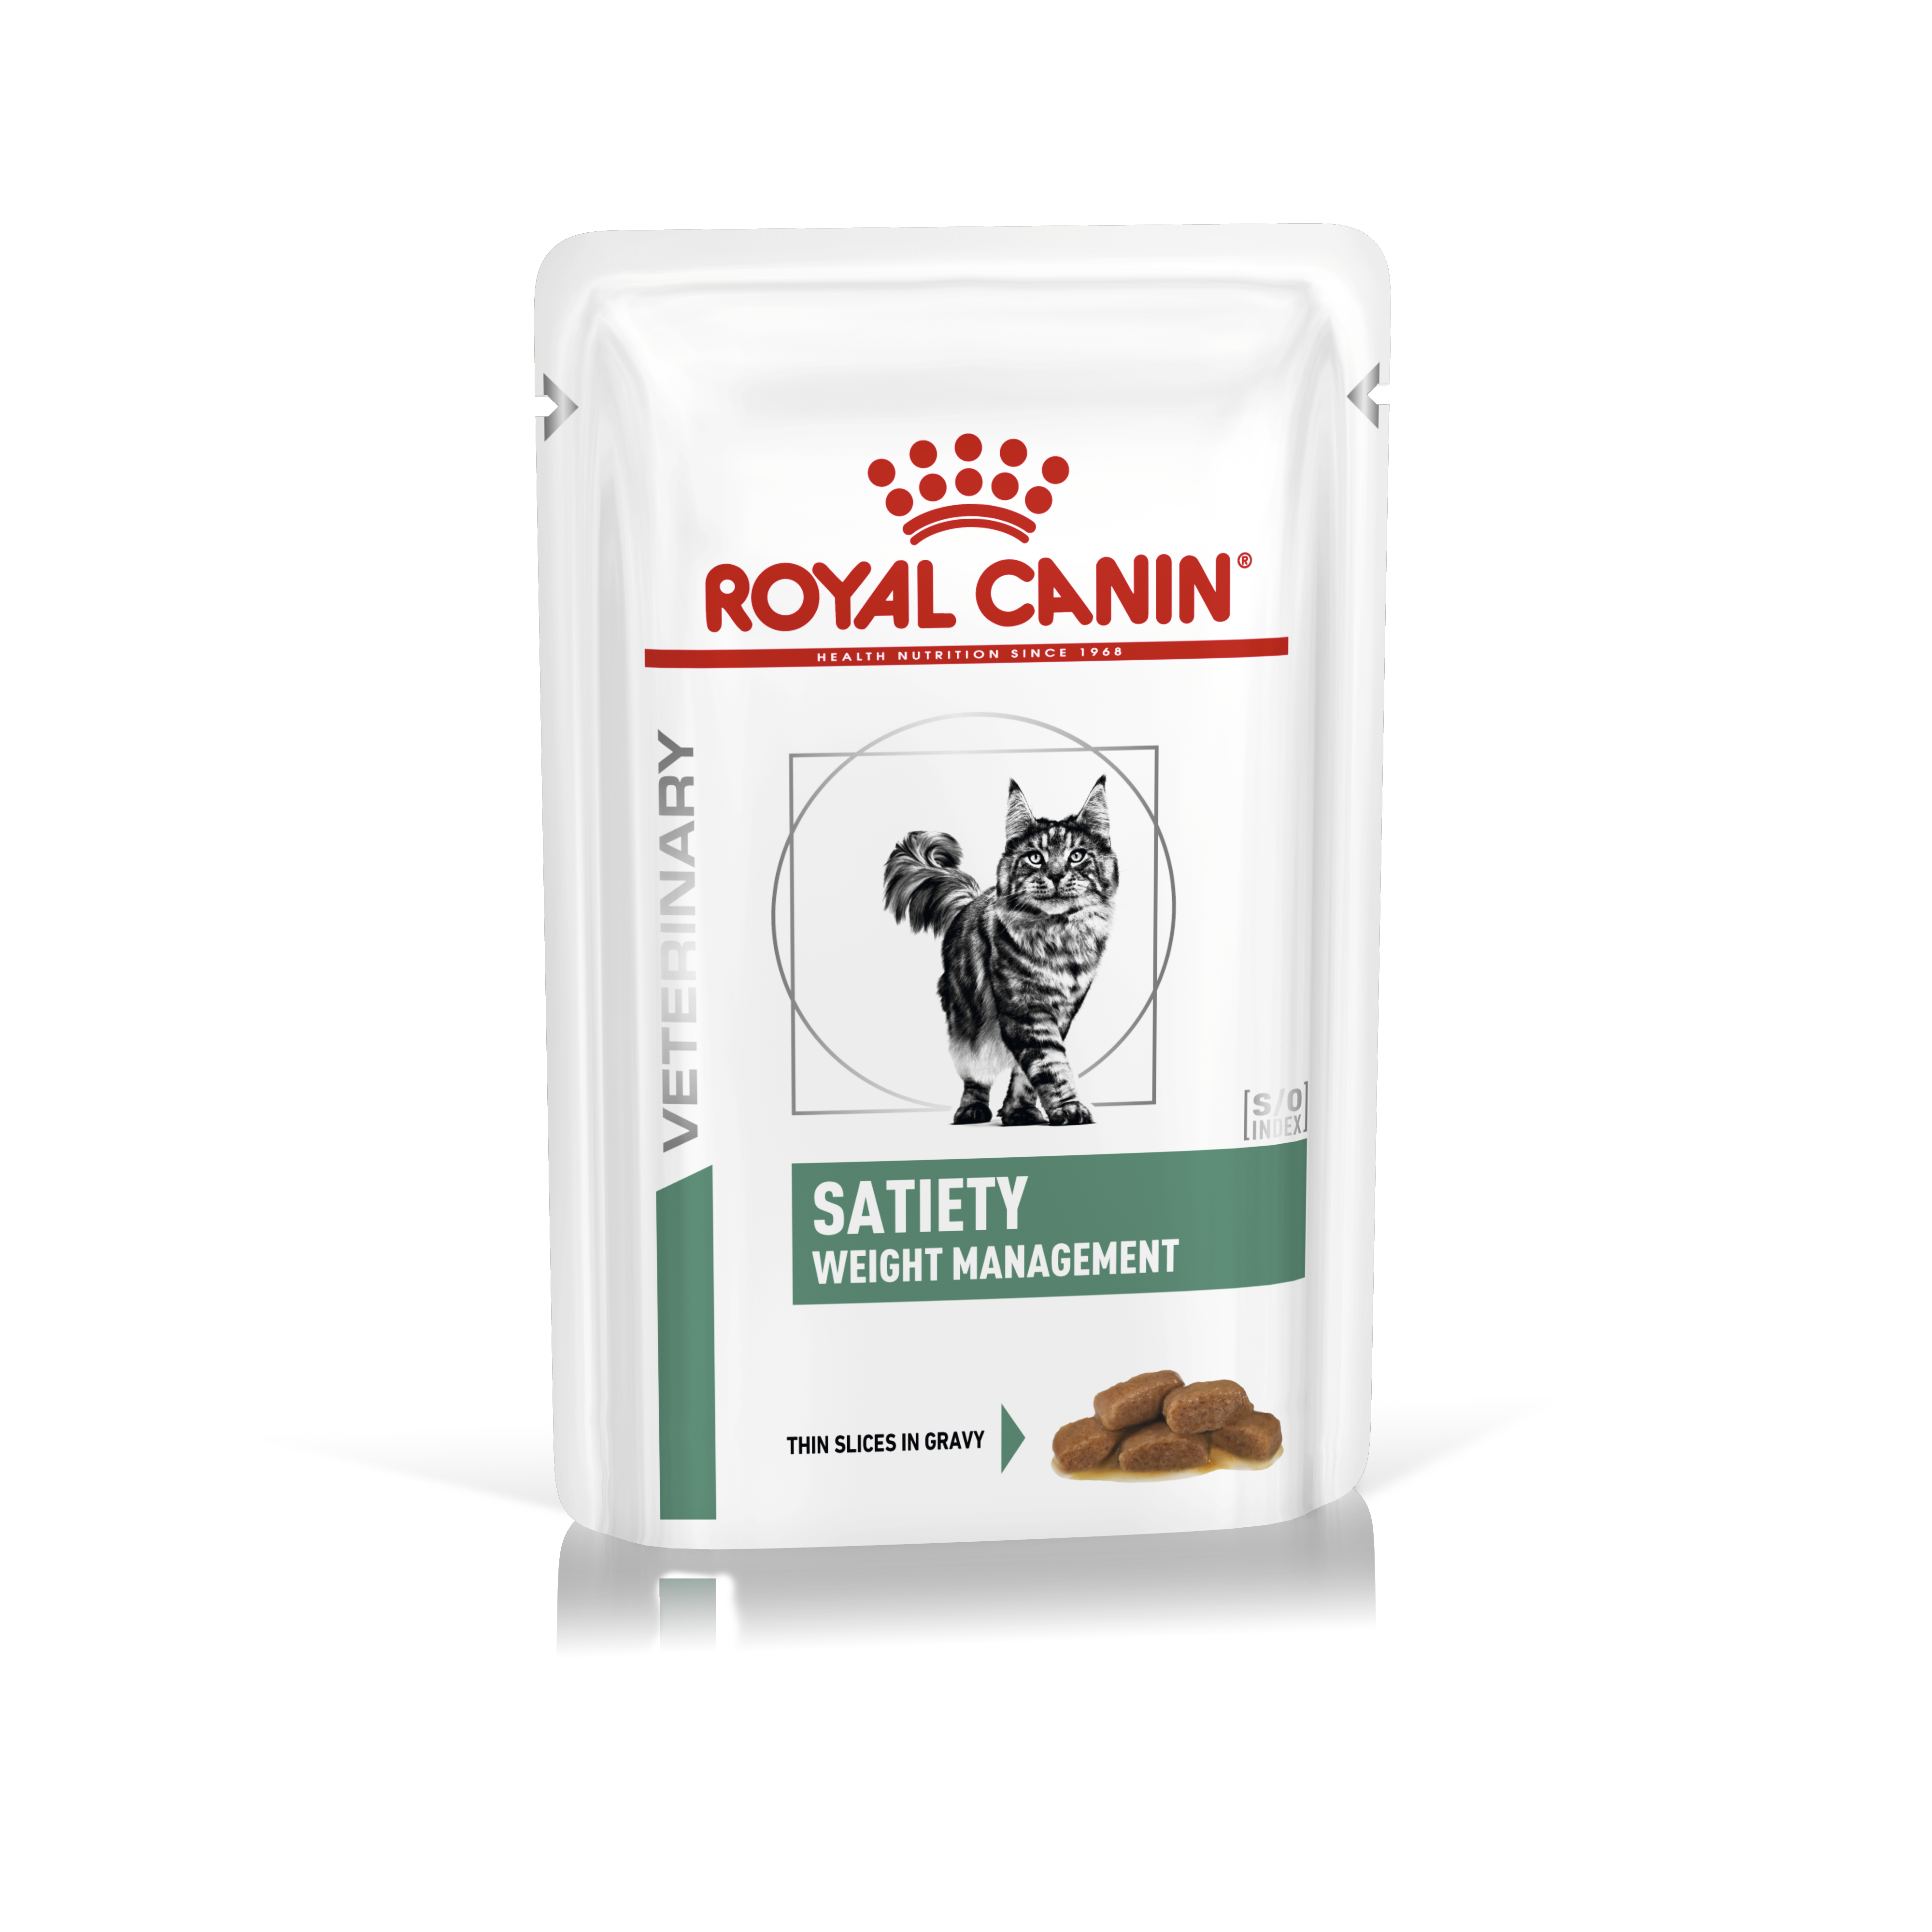 royal canin veterinary satiety weight management